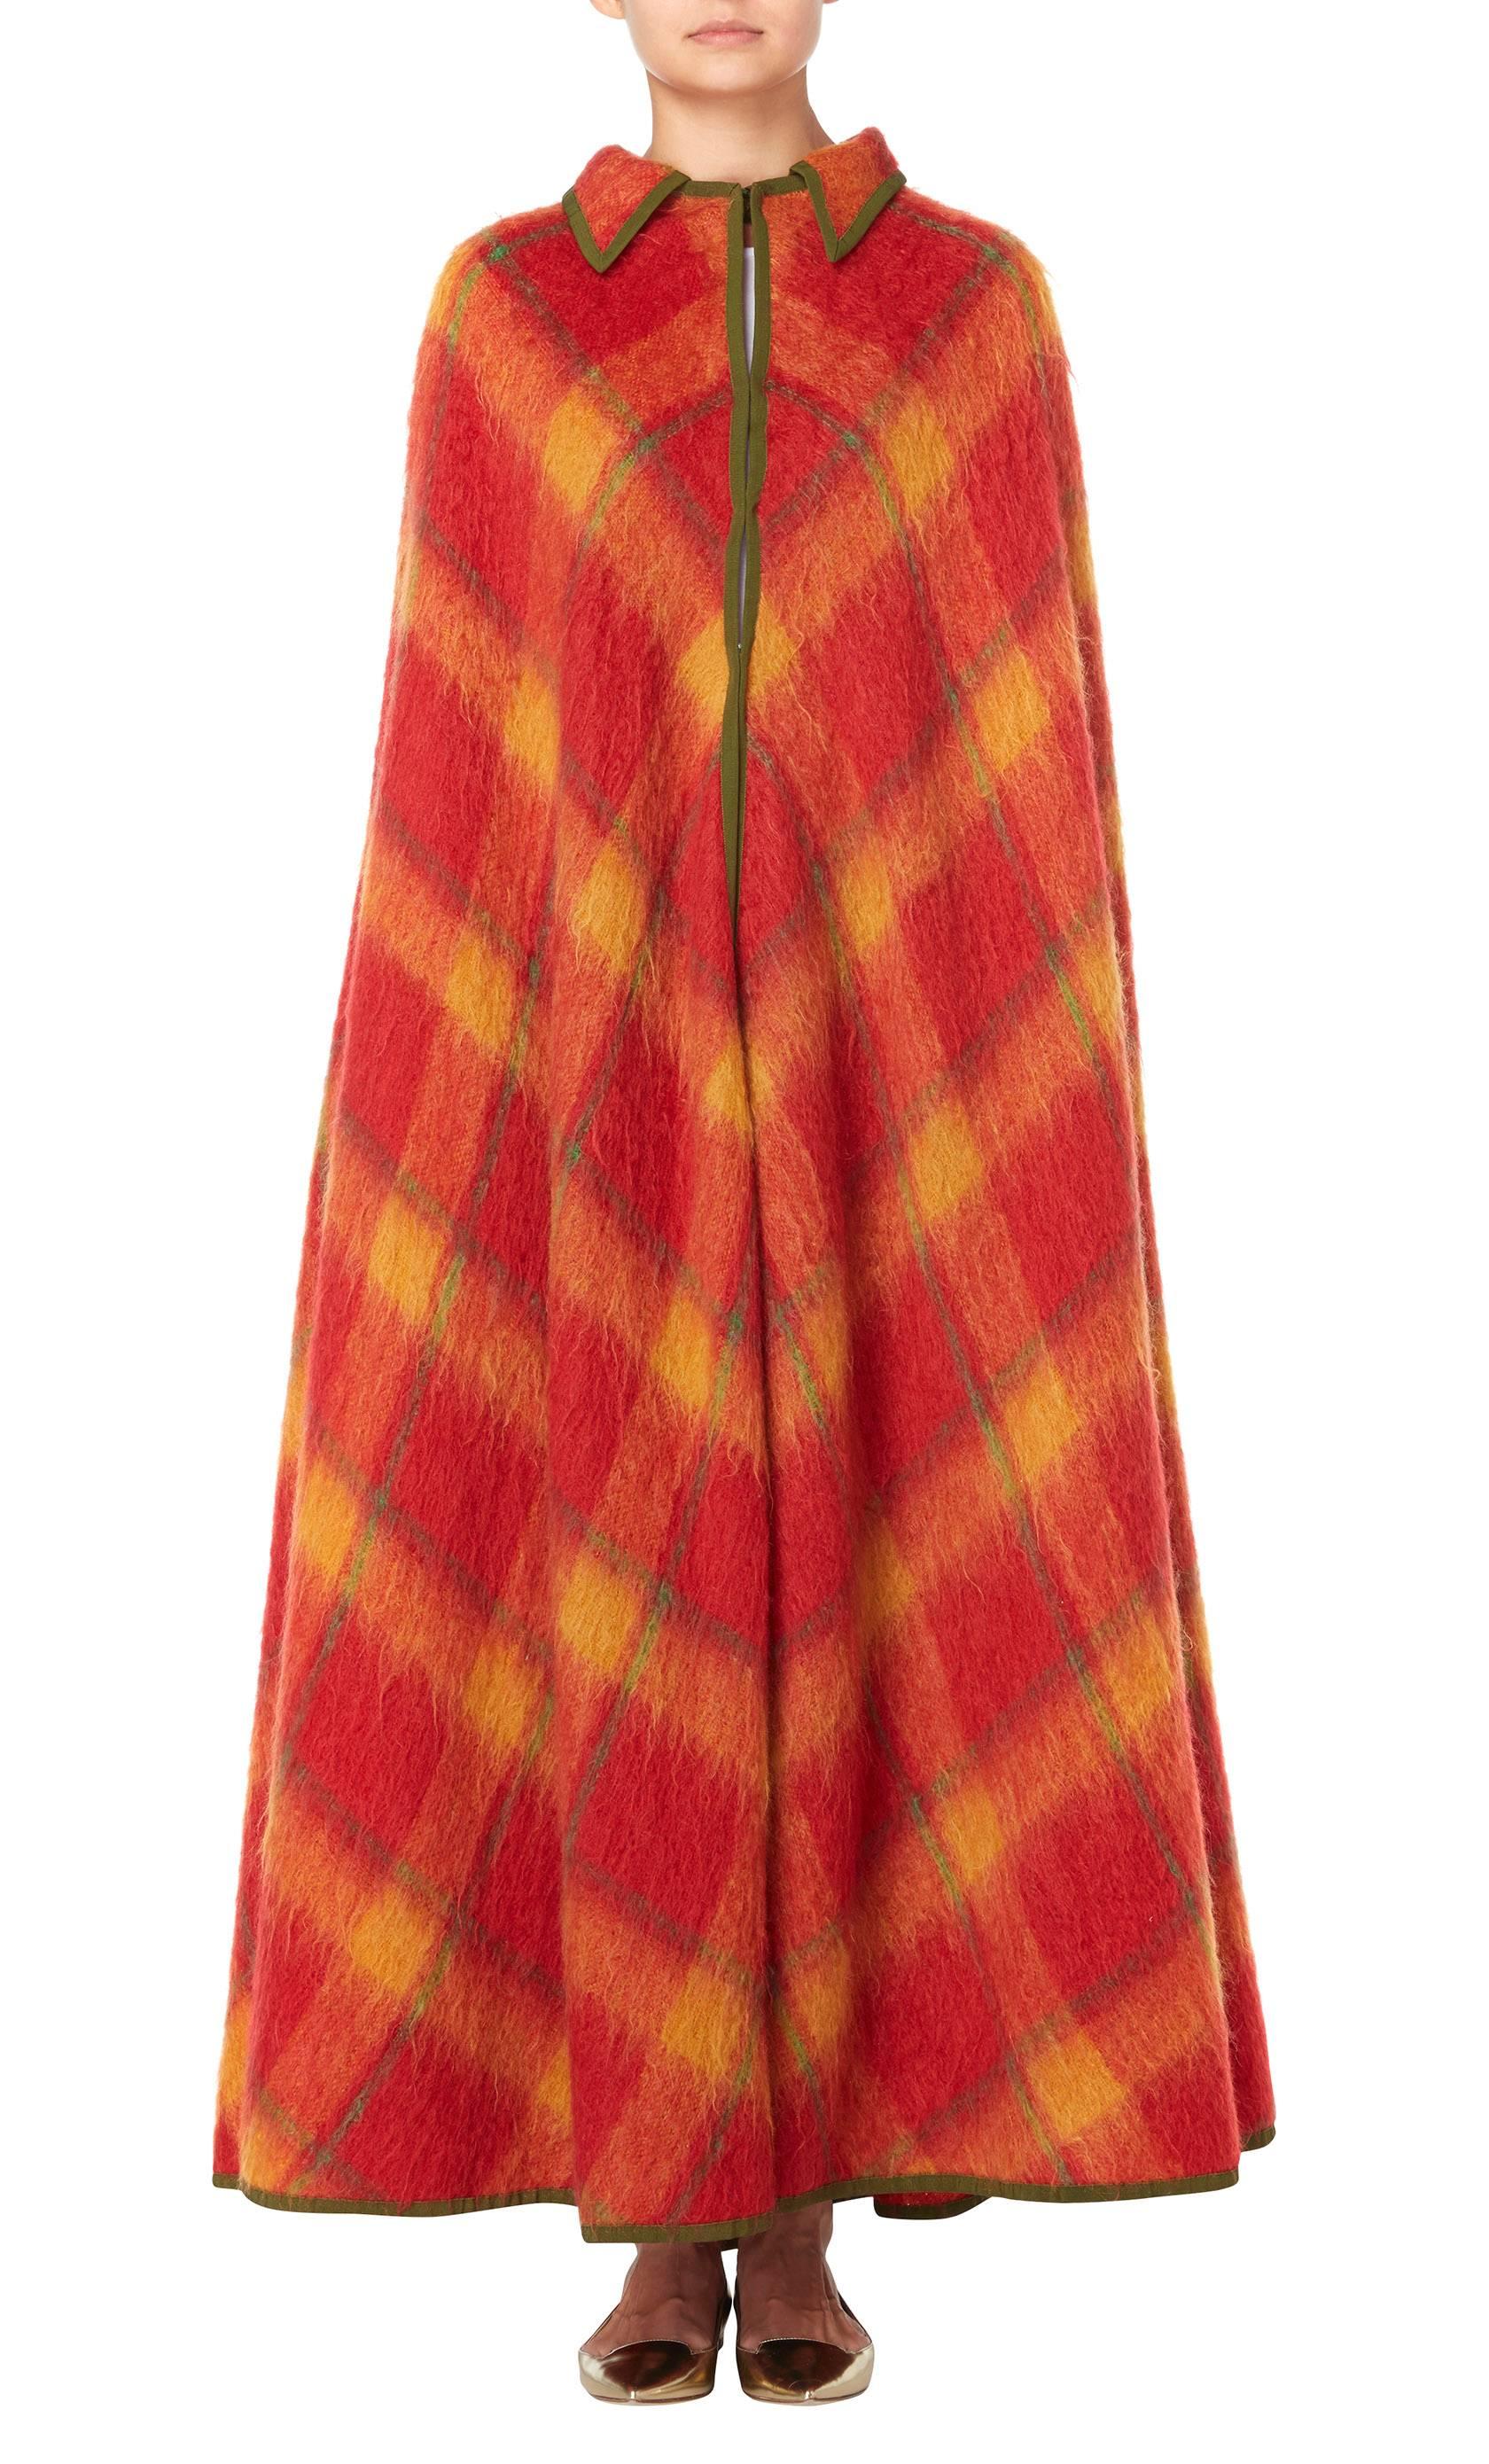 Perfect for cold days, this Lanvin haute couture cape will make a great addition to a Winter wardrobe. Constructed in tartan mohair in autumnal shades of orange, green and yellow, a green grosgrain ribbon trims the edges. Featuring a single lapel